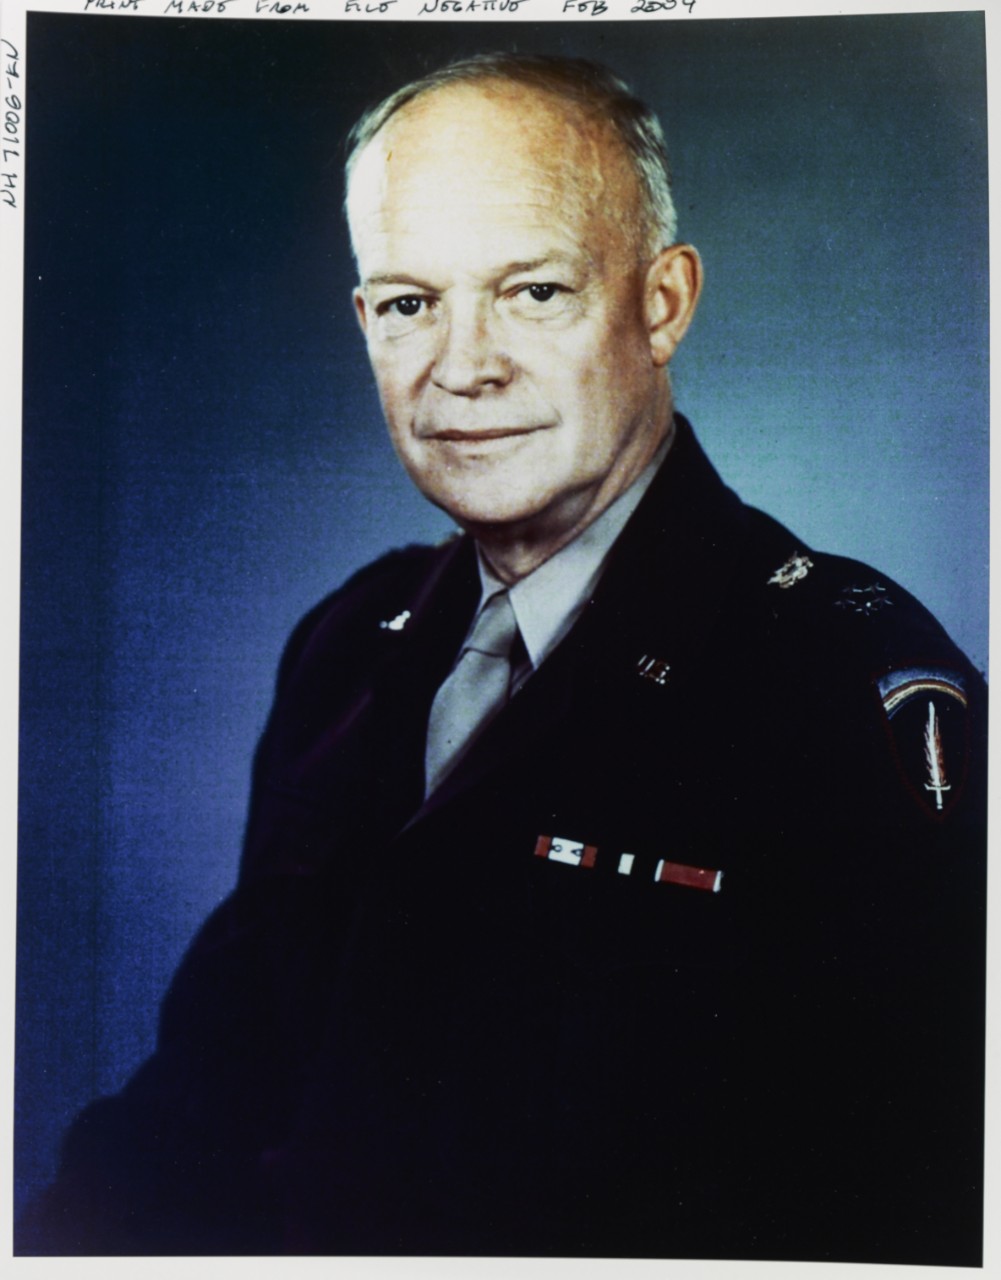 Photo #: NH 71006-KN General of the Army Dwight D. Eisenhower,